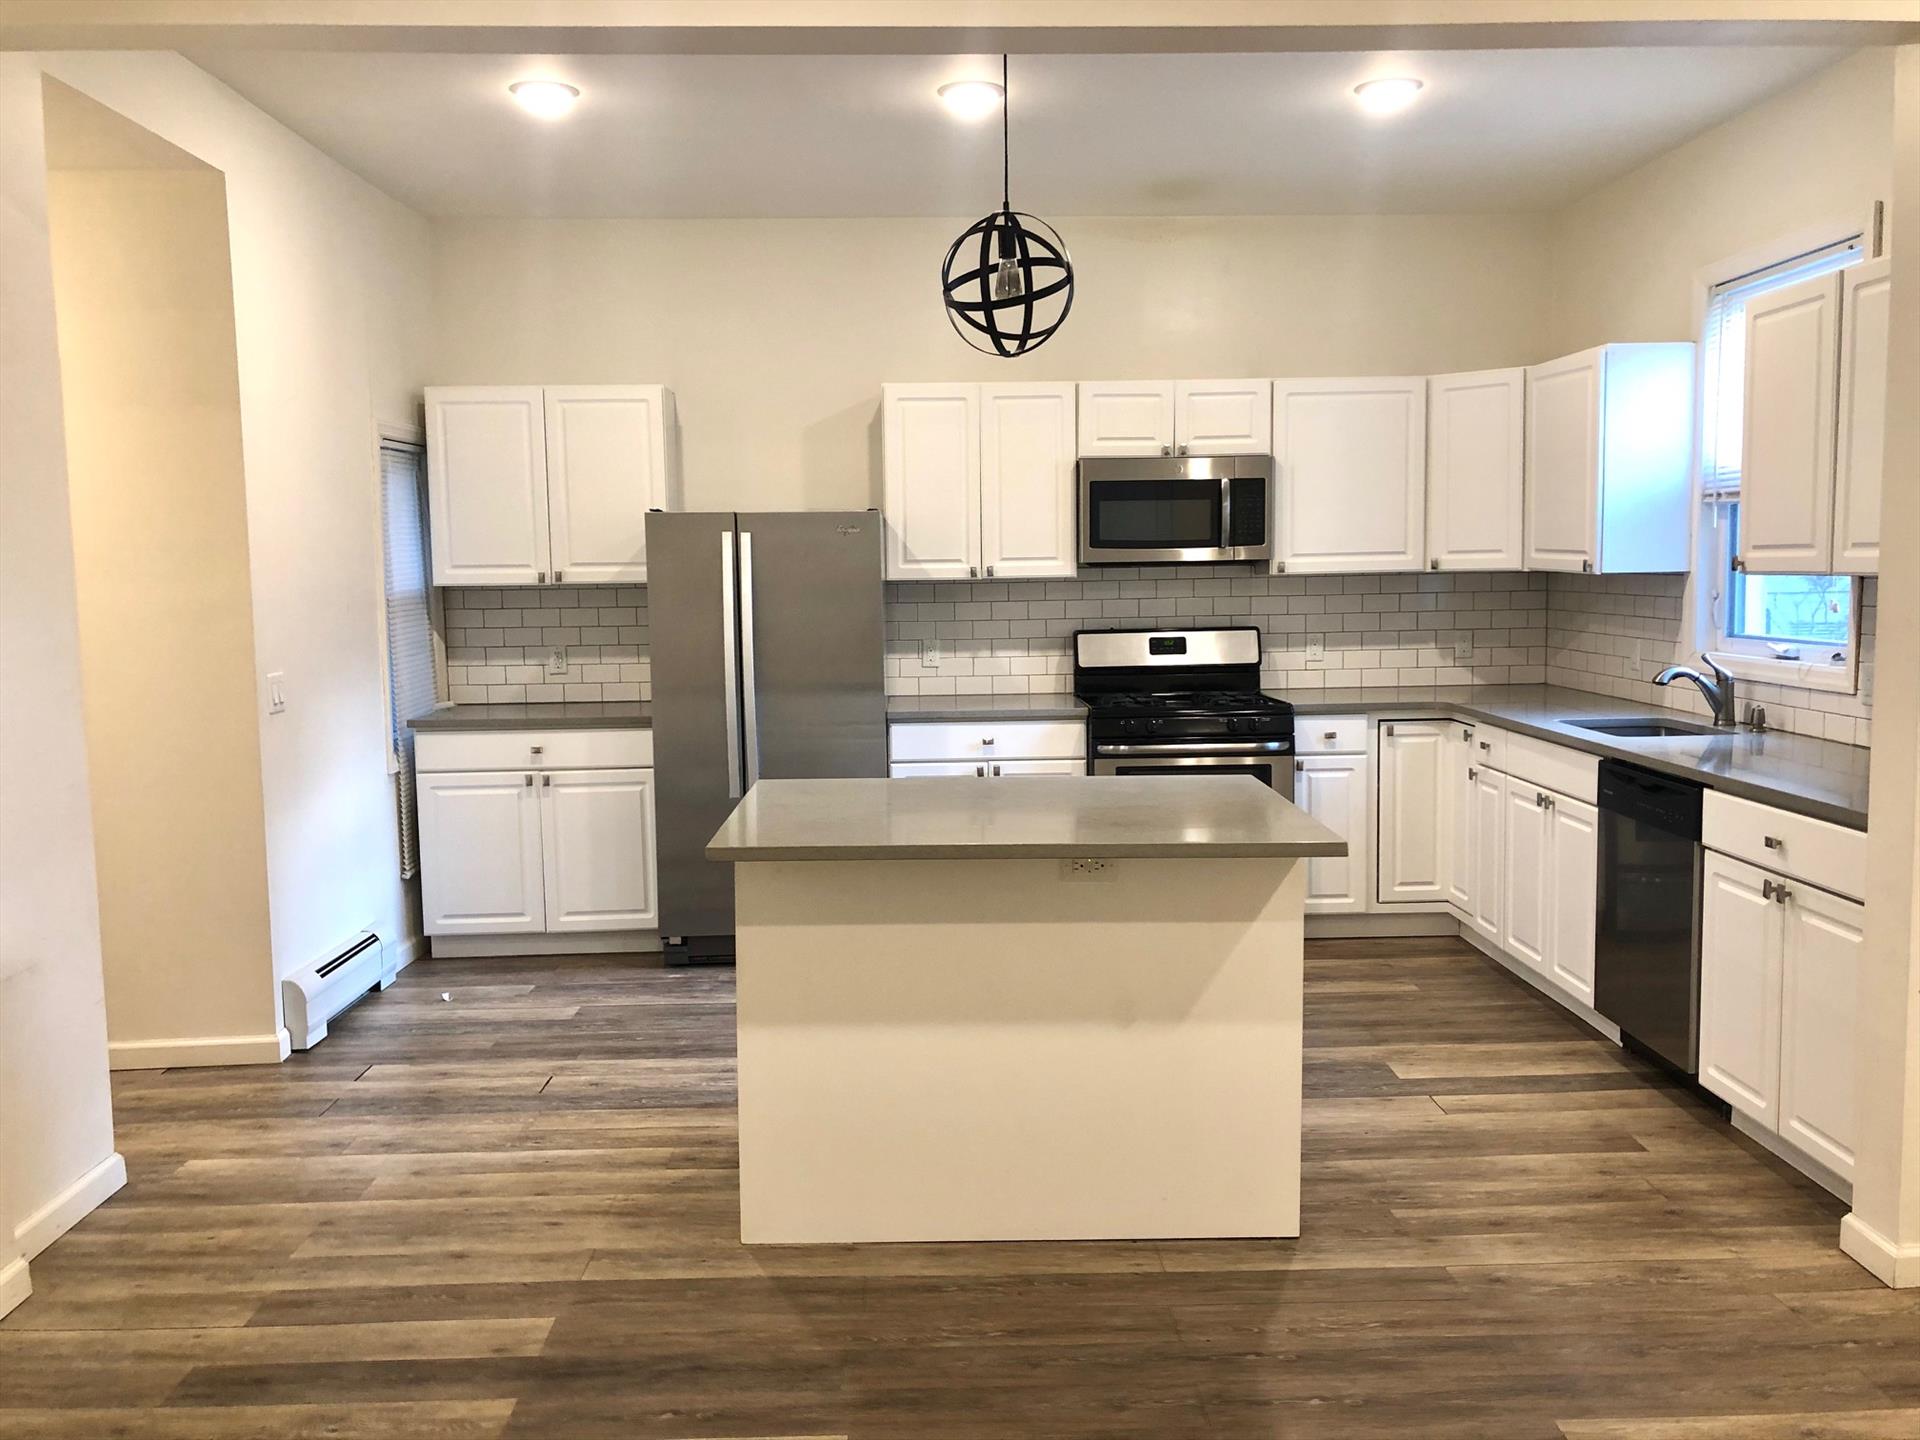 Amazing newly renovated 4 bedroom, 1.5 baths just steps from the Journal Sq Path Station w/ Parking! The apartment features new kitchen with stainless steel appliances, quartz countertops, all new tiles and hardwood floors. Unit also features a beautiful backyard, free laundry in the basement and one parking spot in front of the building included with rent. Available ASAP. one month broker fee.
